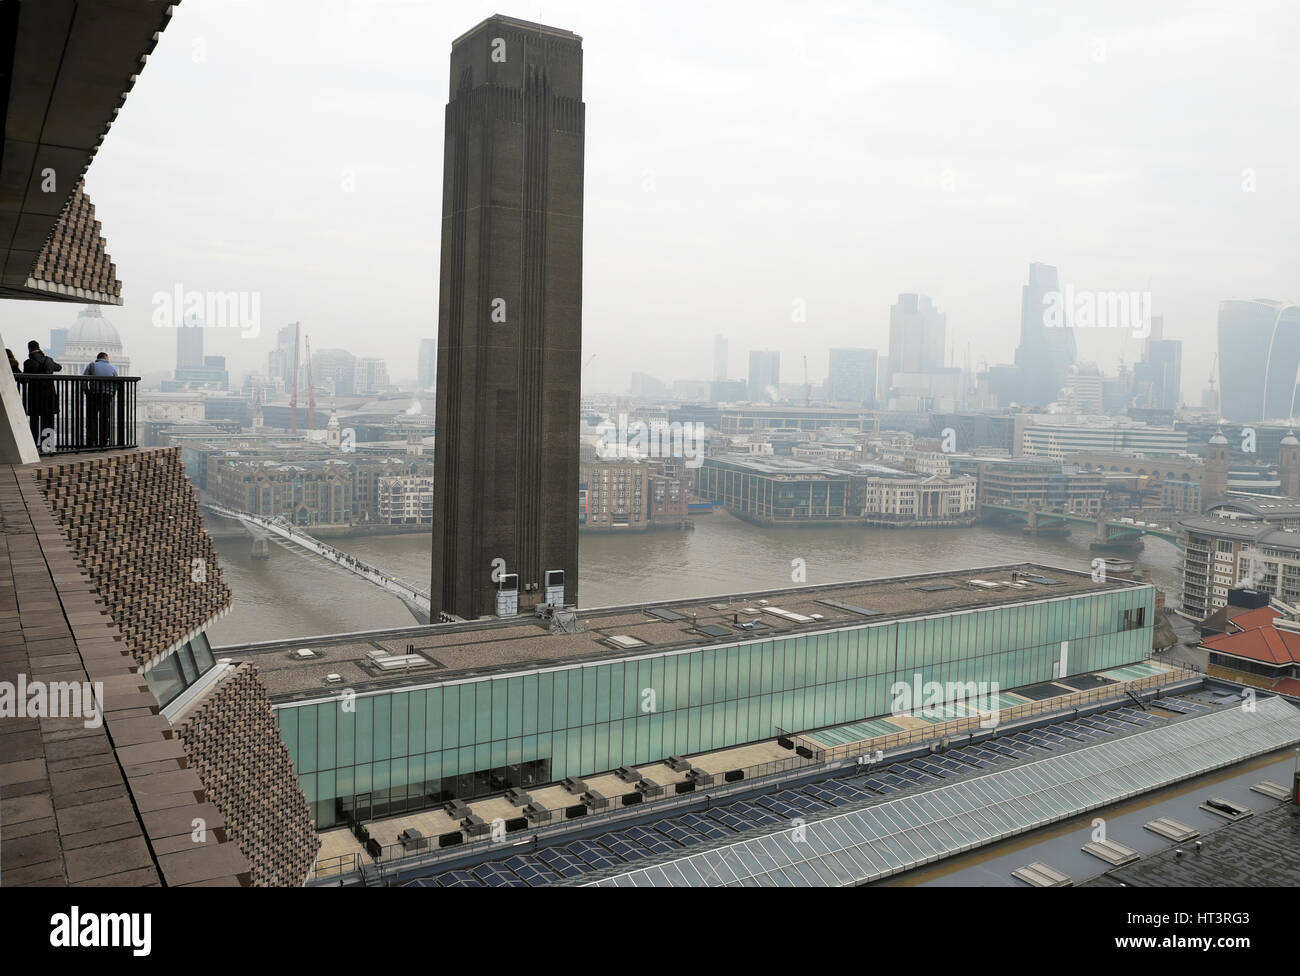 View from new Switch House building level 10 at Tate Modern Art Gallery financial district sky in smog and pollution City of London UK  KATHY DEWITT Stock Photo